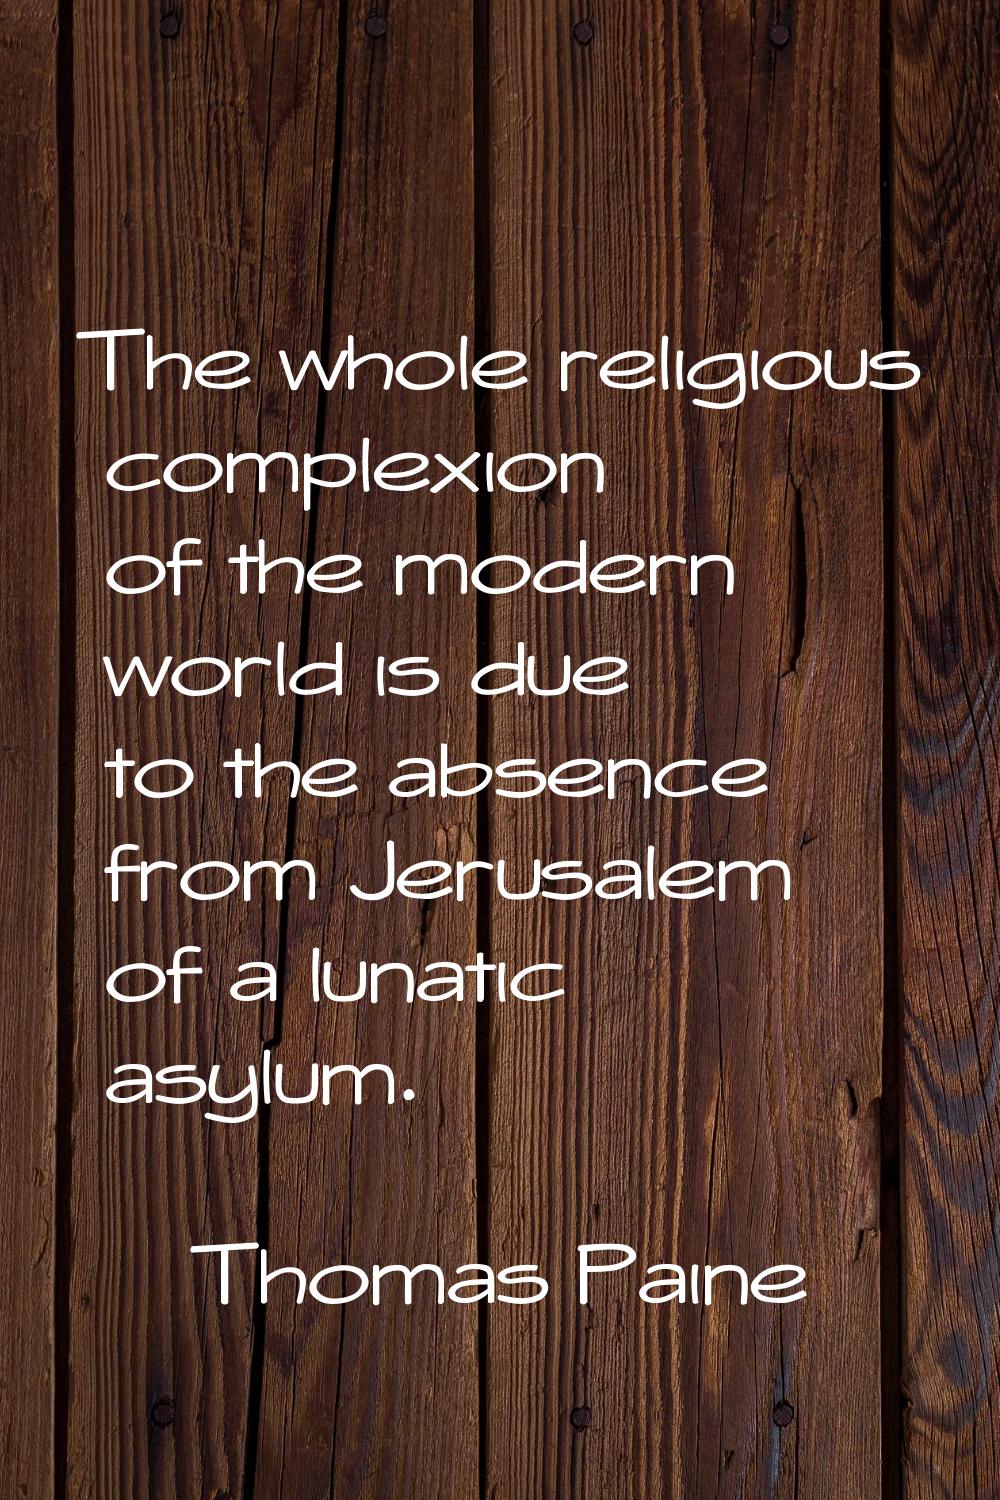 The whole religious complexion of the modern world is due to the absence from Jerusalem of a lunati